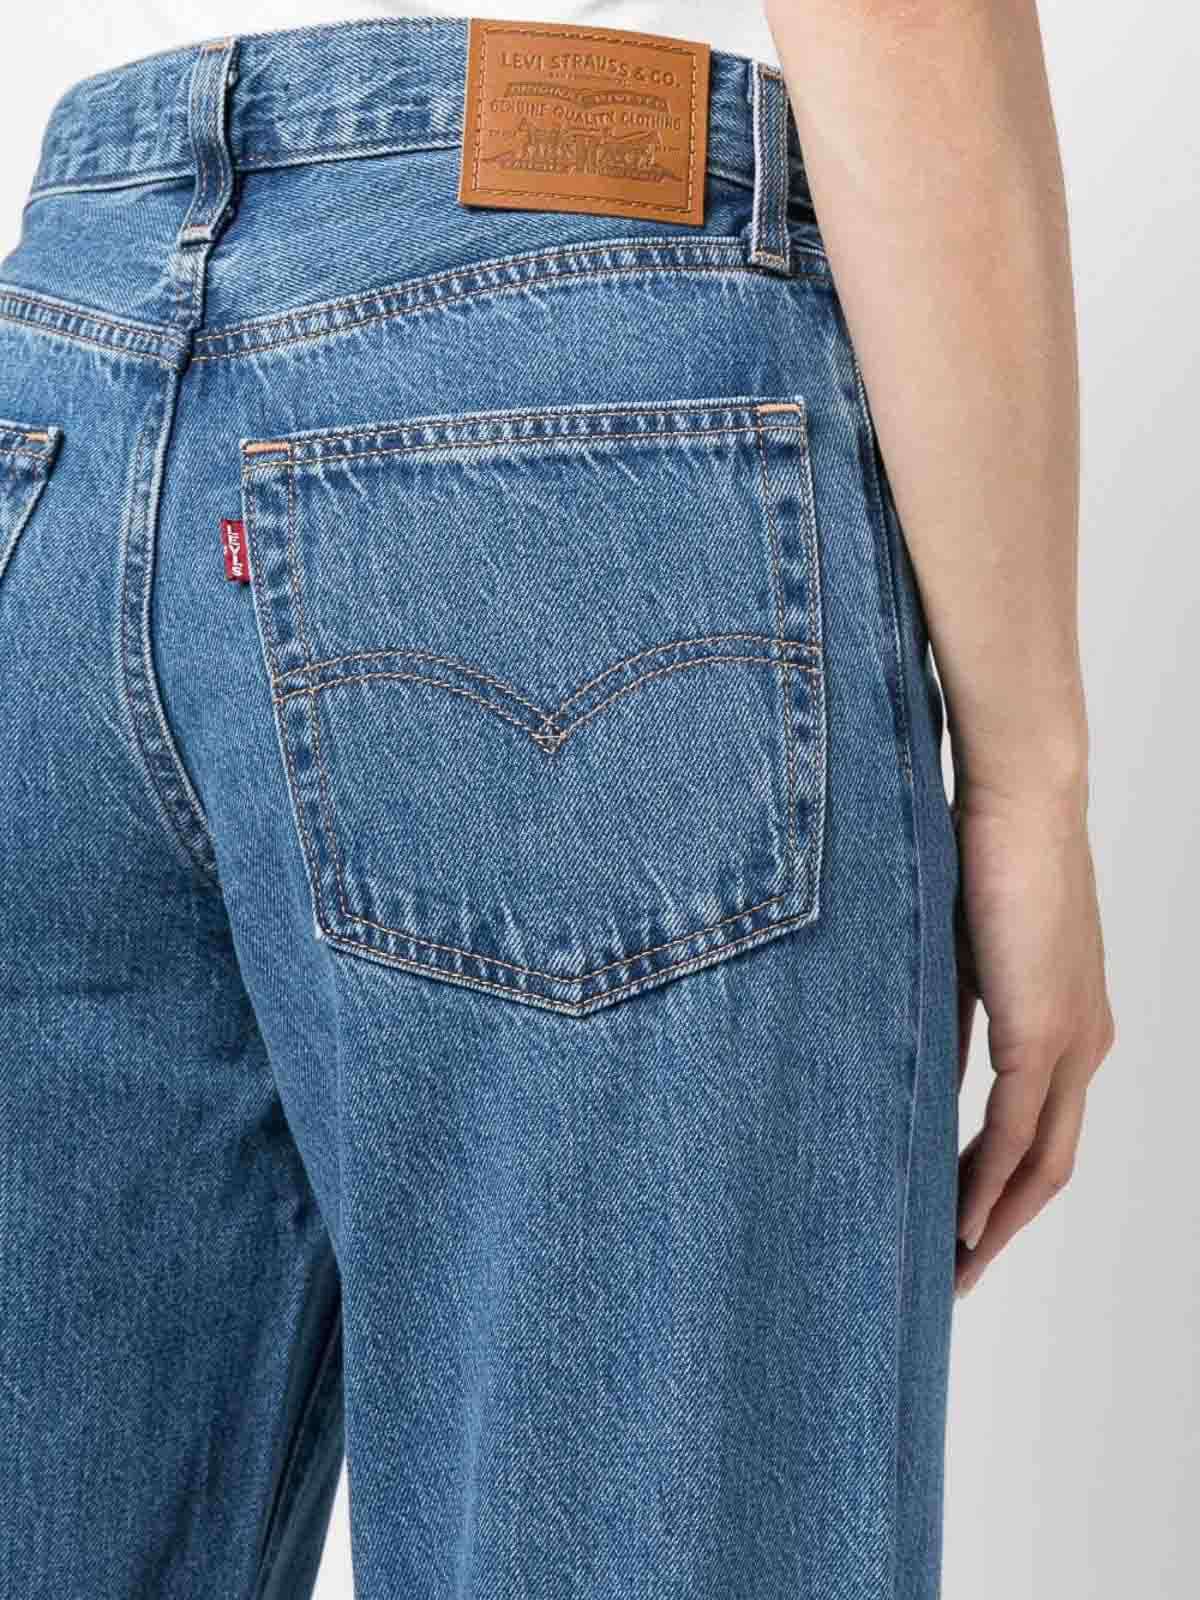 Bootcut jeans Levi'S - Baggy dad jeans - A34940013 | thebs.com [ikrix.com]